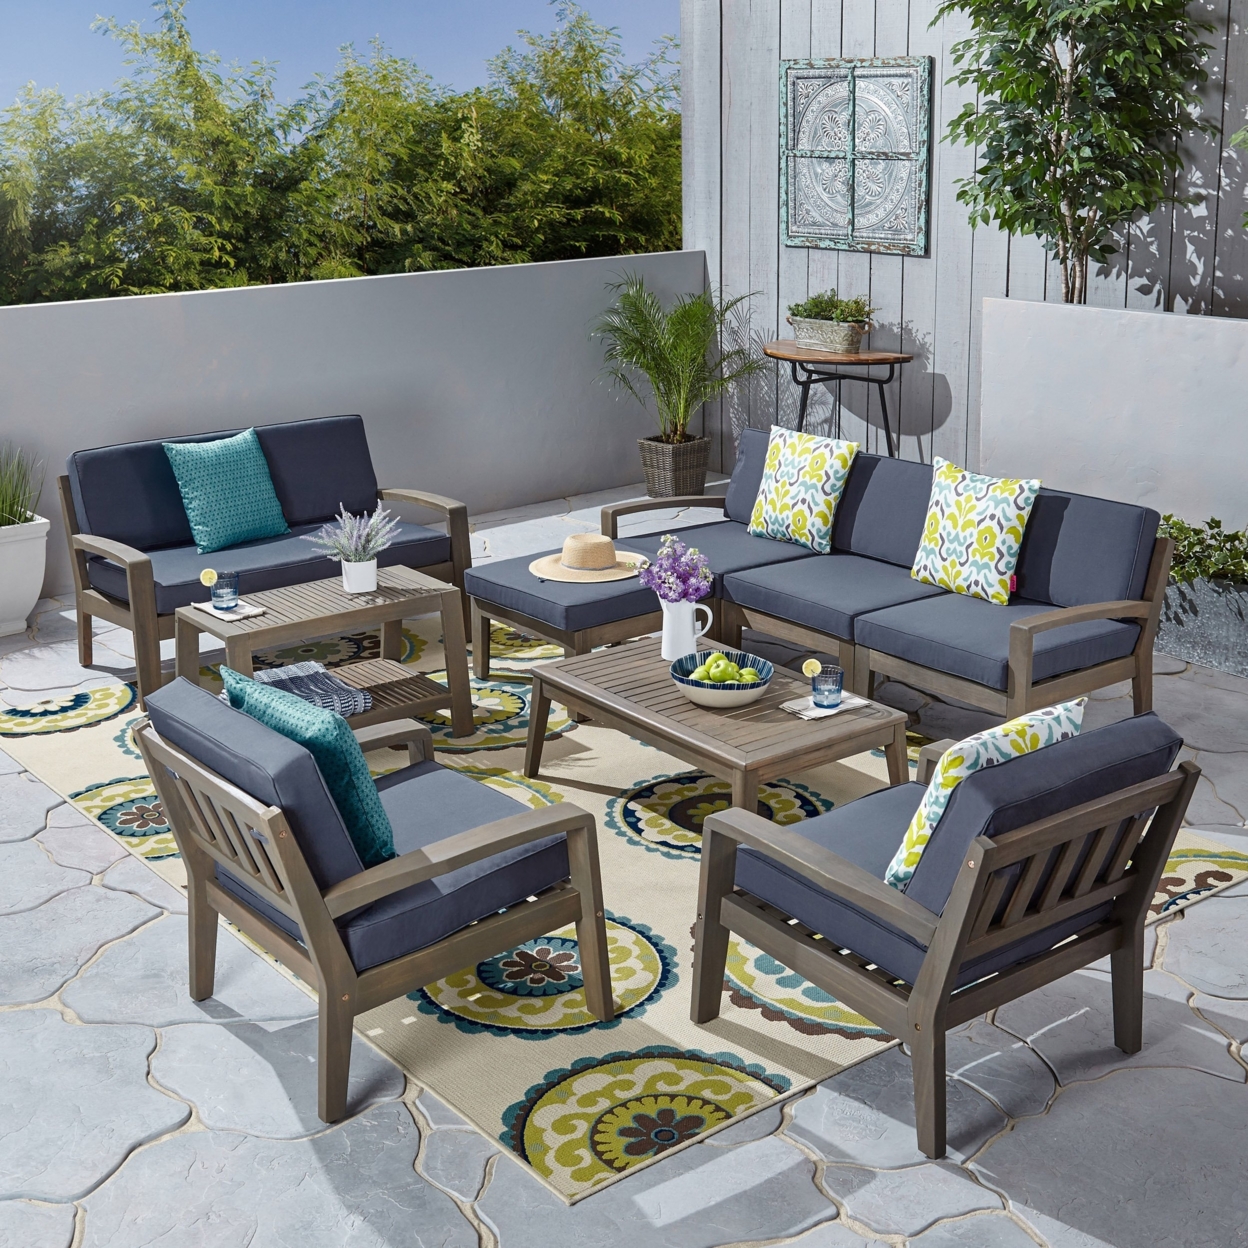 Parma 7-Seater Sectional Sofa Set For Patio With Loveseat - Gray / Dark Gray